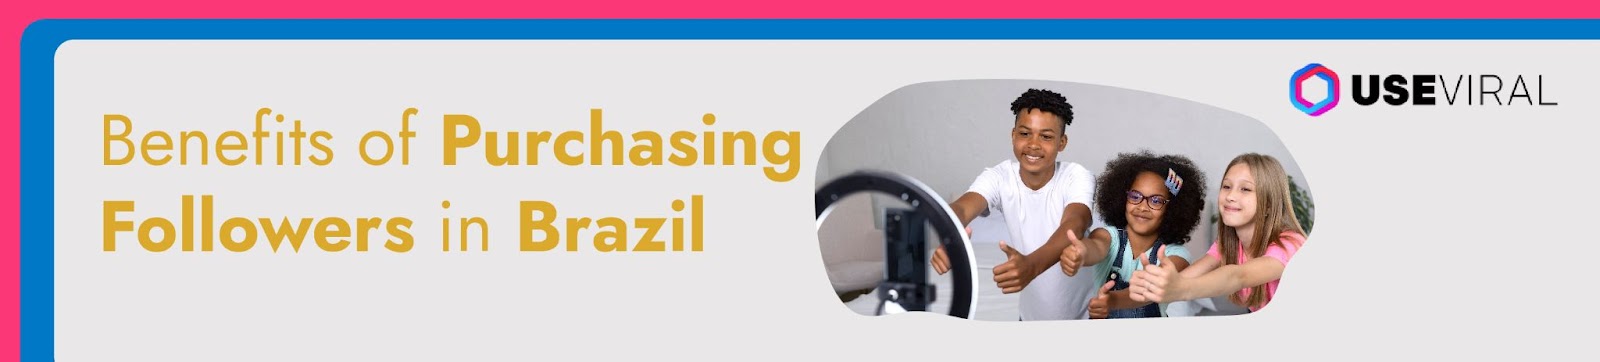 Benefits of Purchasing Followers in Brazil